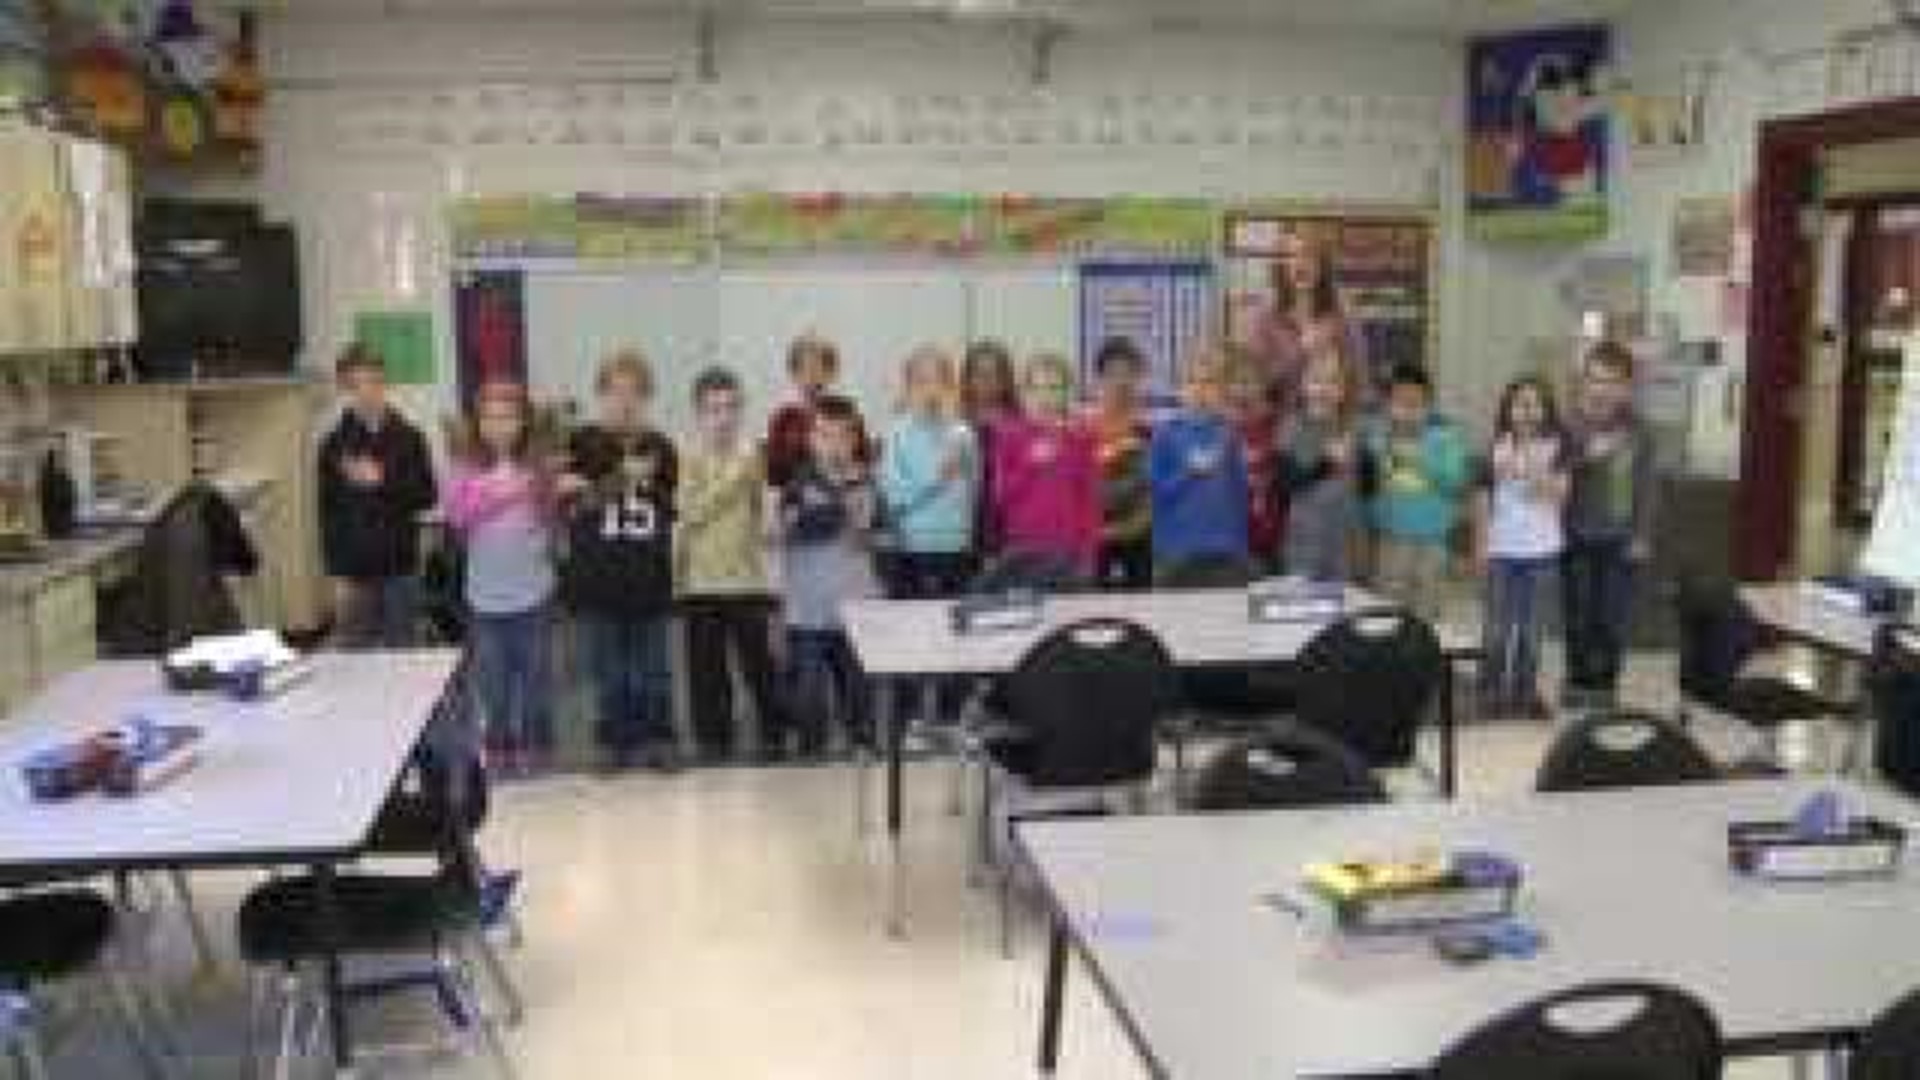 Mrs. Lueders' class says the Pledge of Allegiance